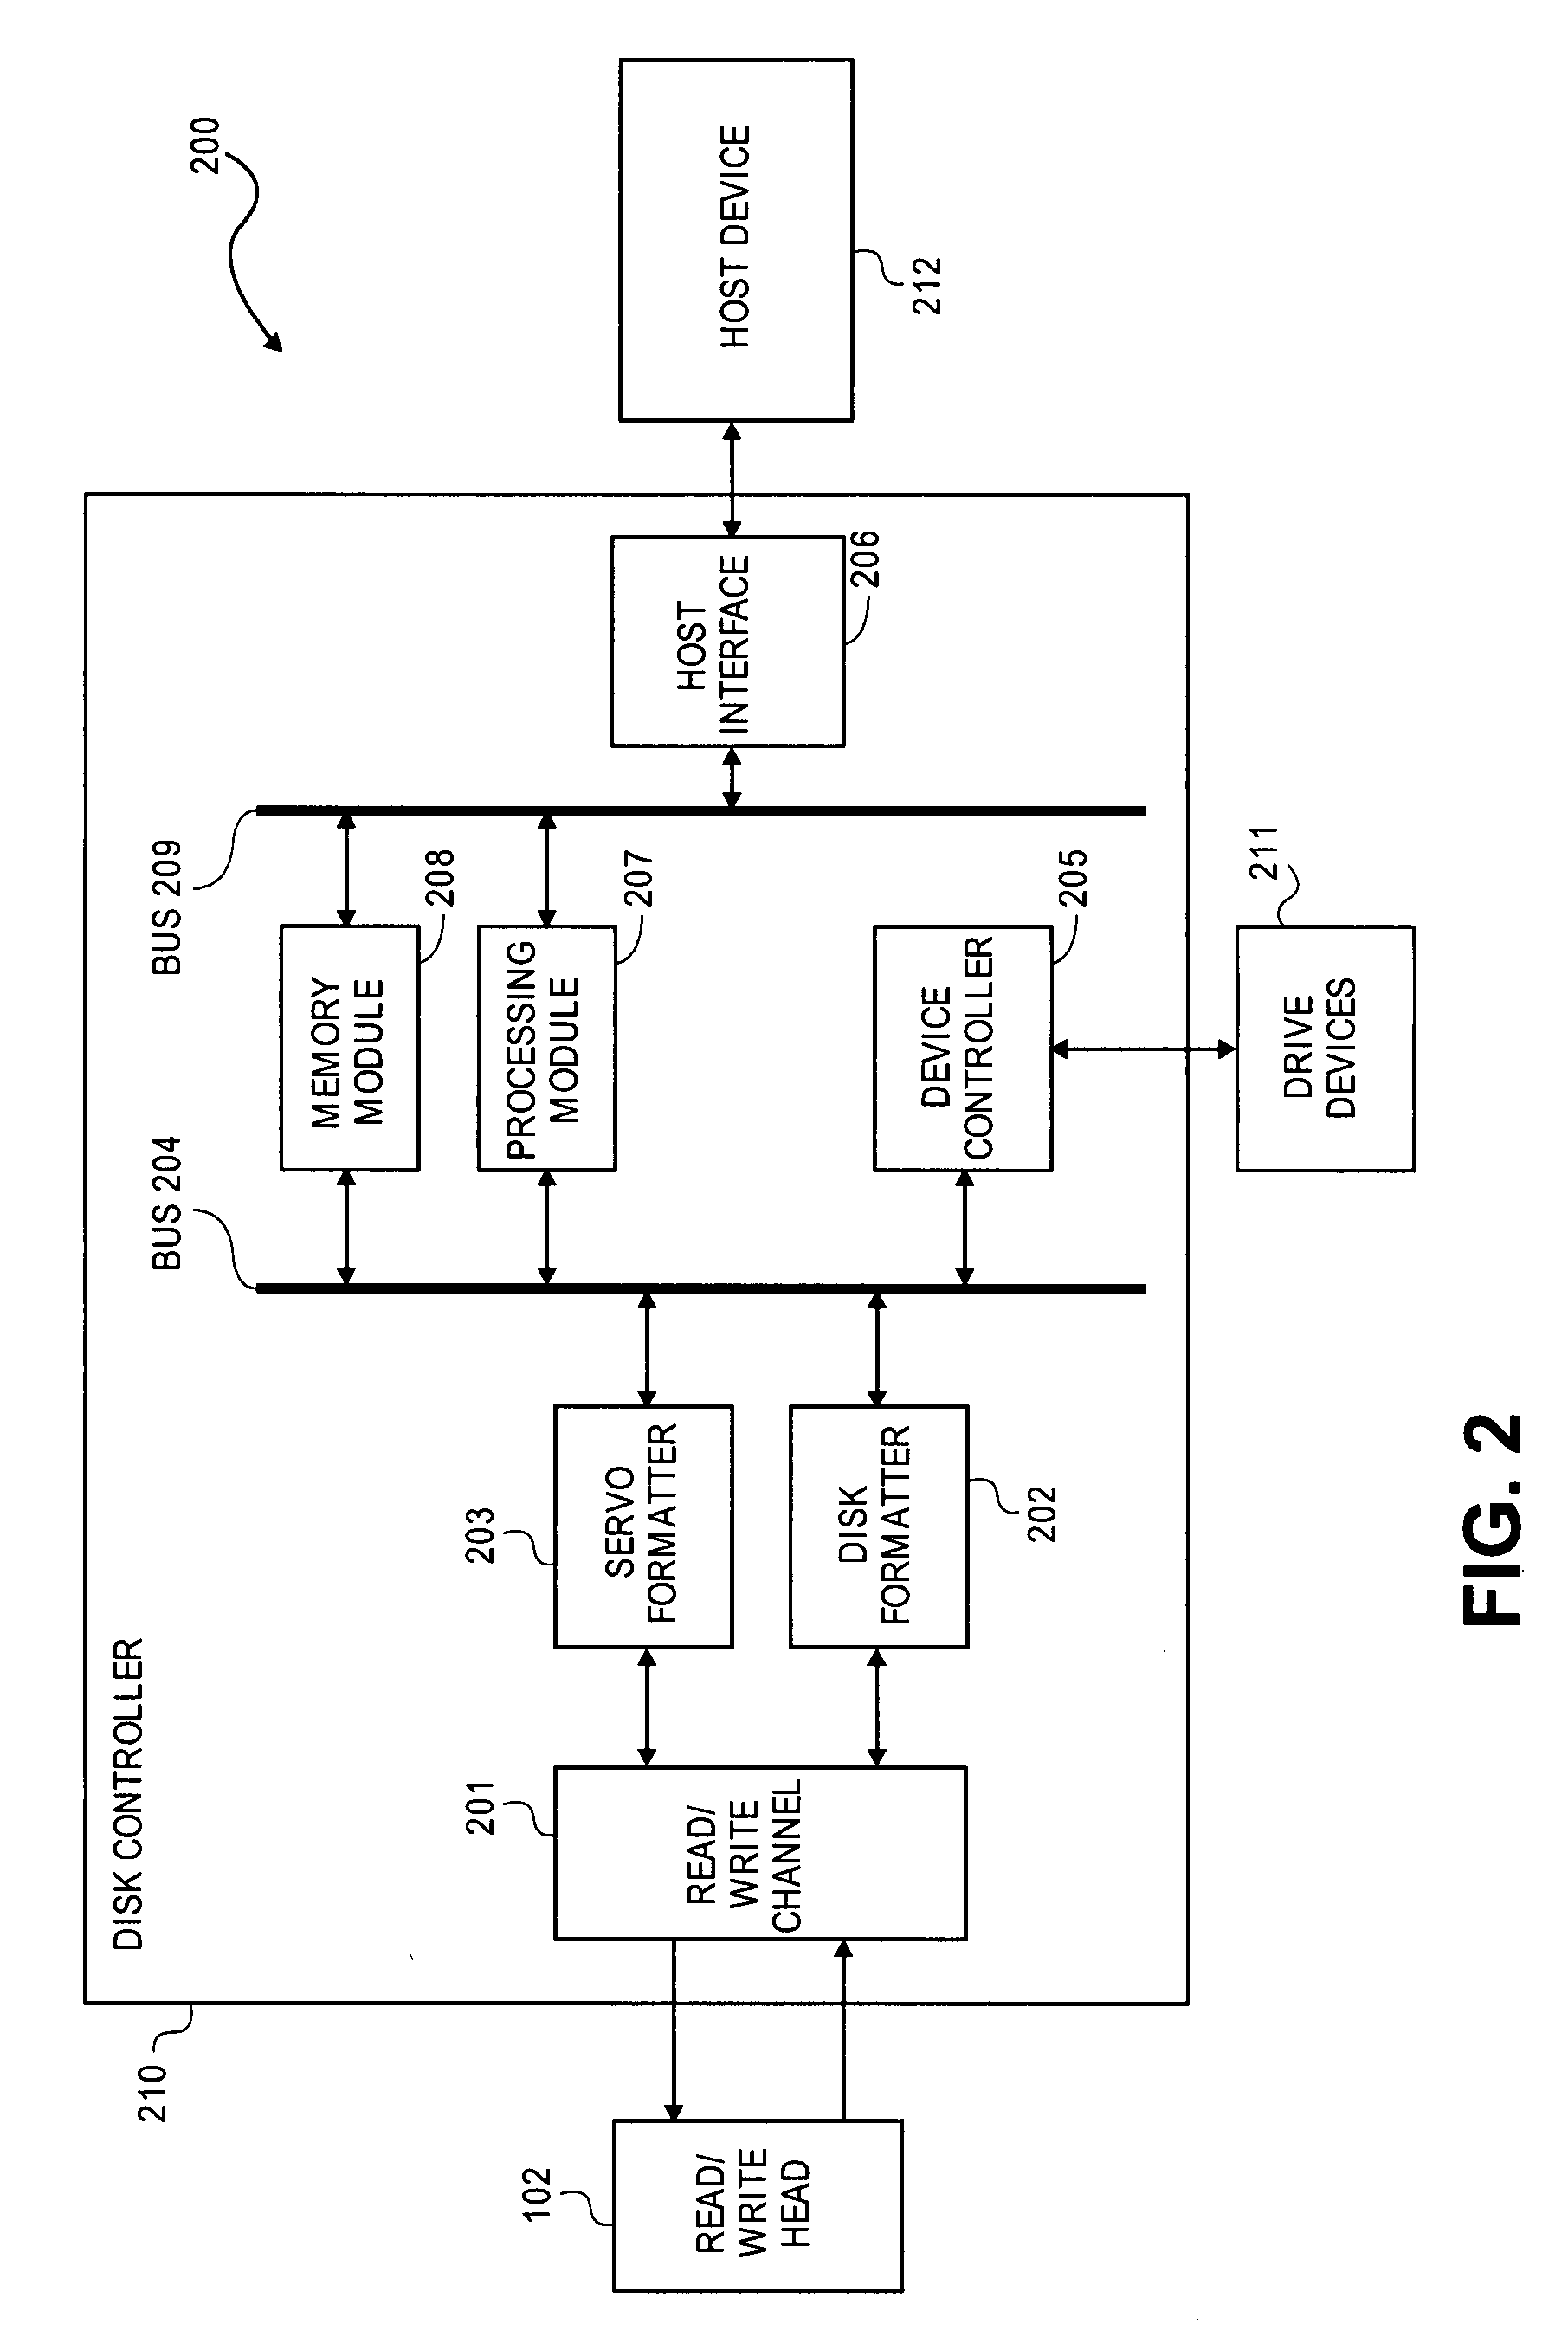 Baseline popping noise detection circuit